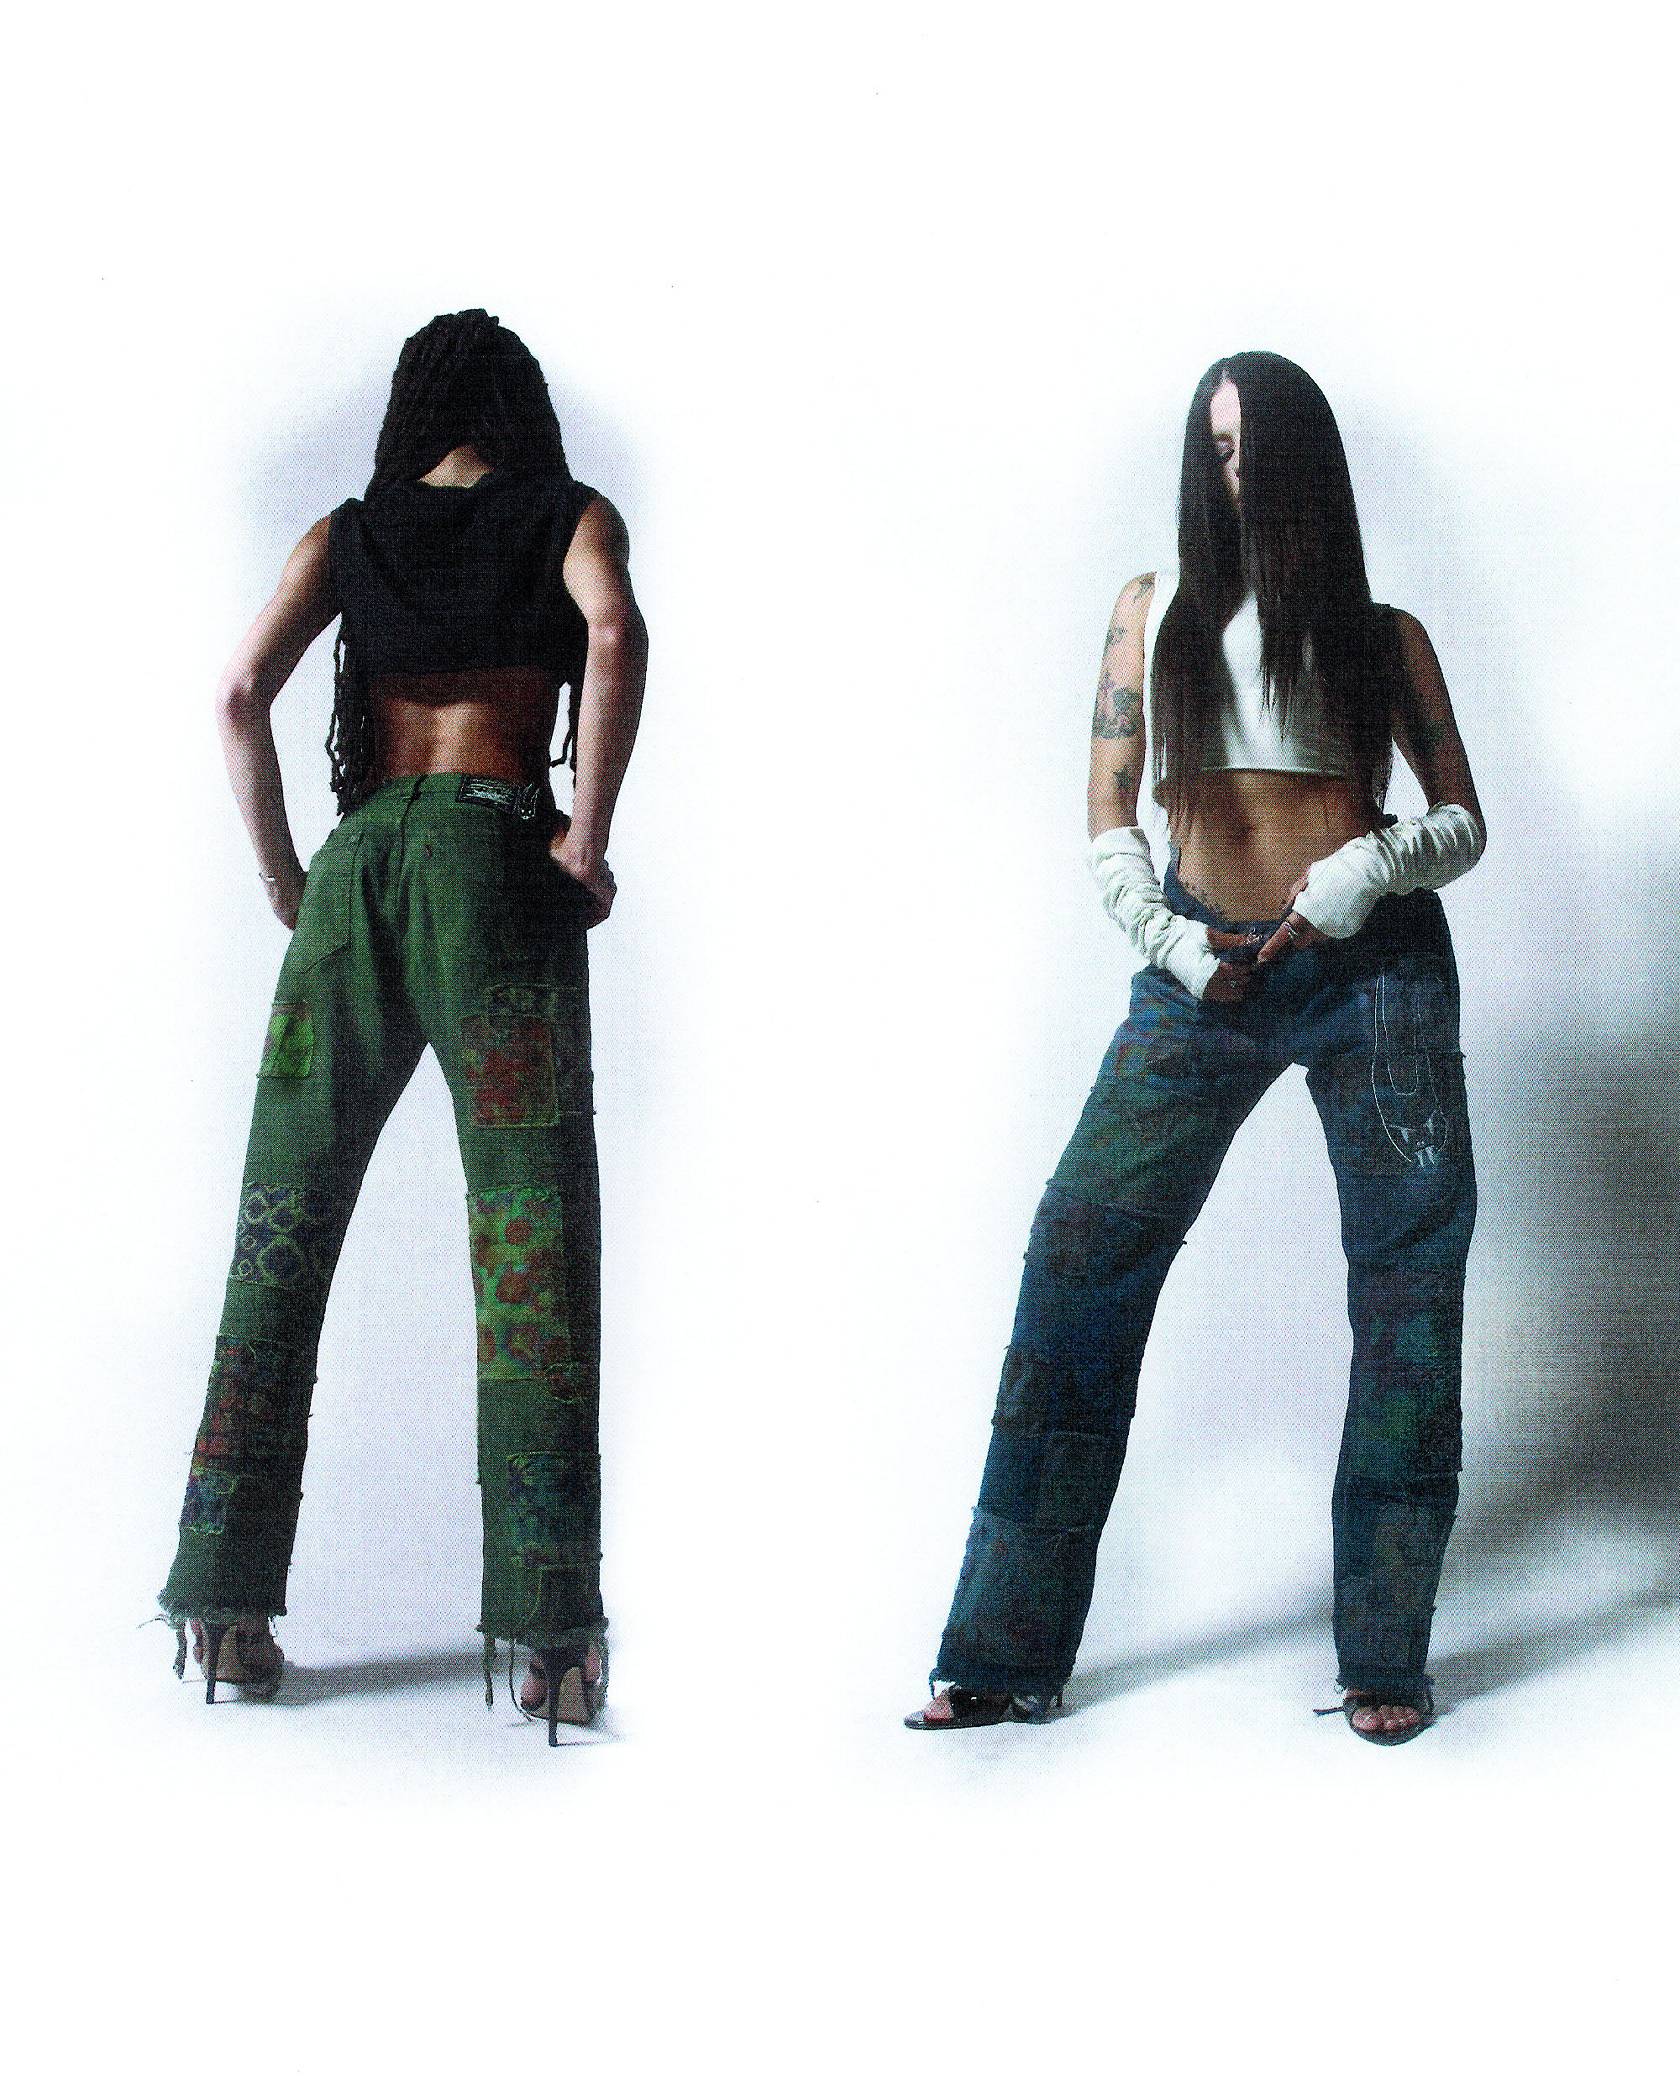 2 models - one facing forward in the blue colored jeans, the other with their back turned wearing the green